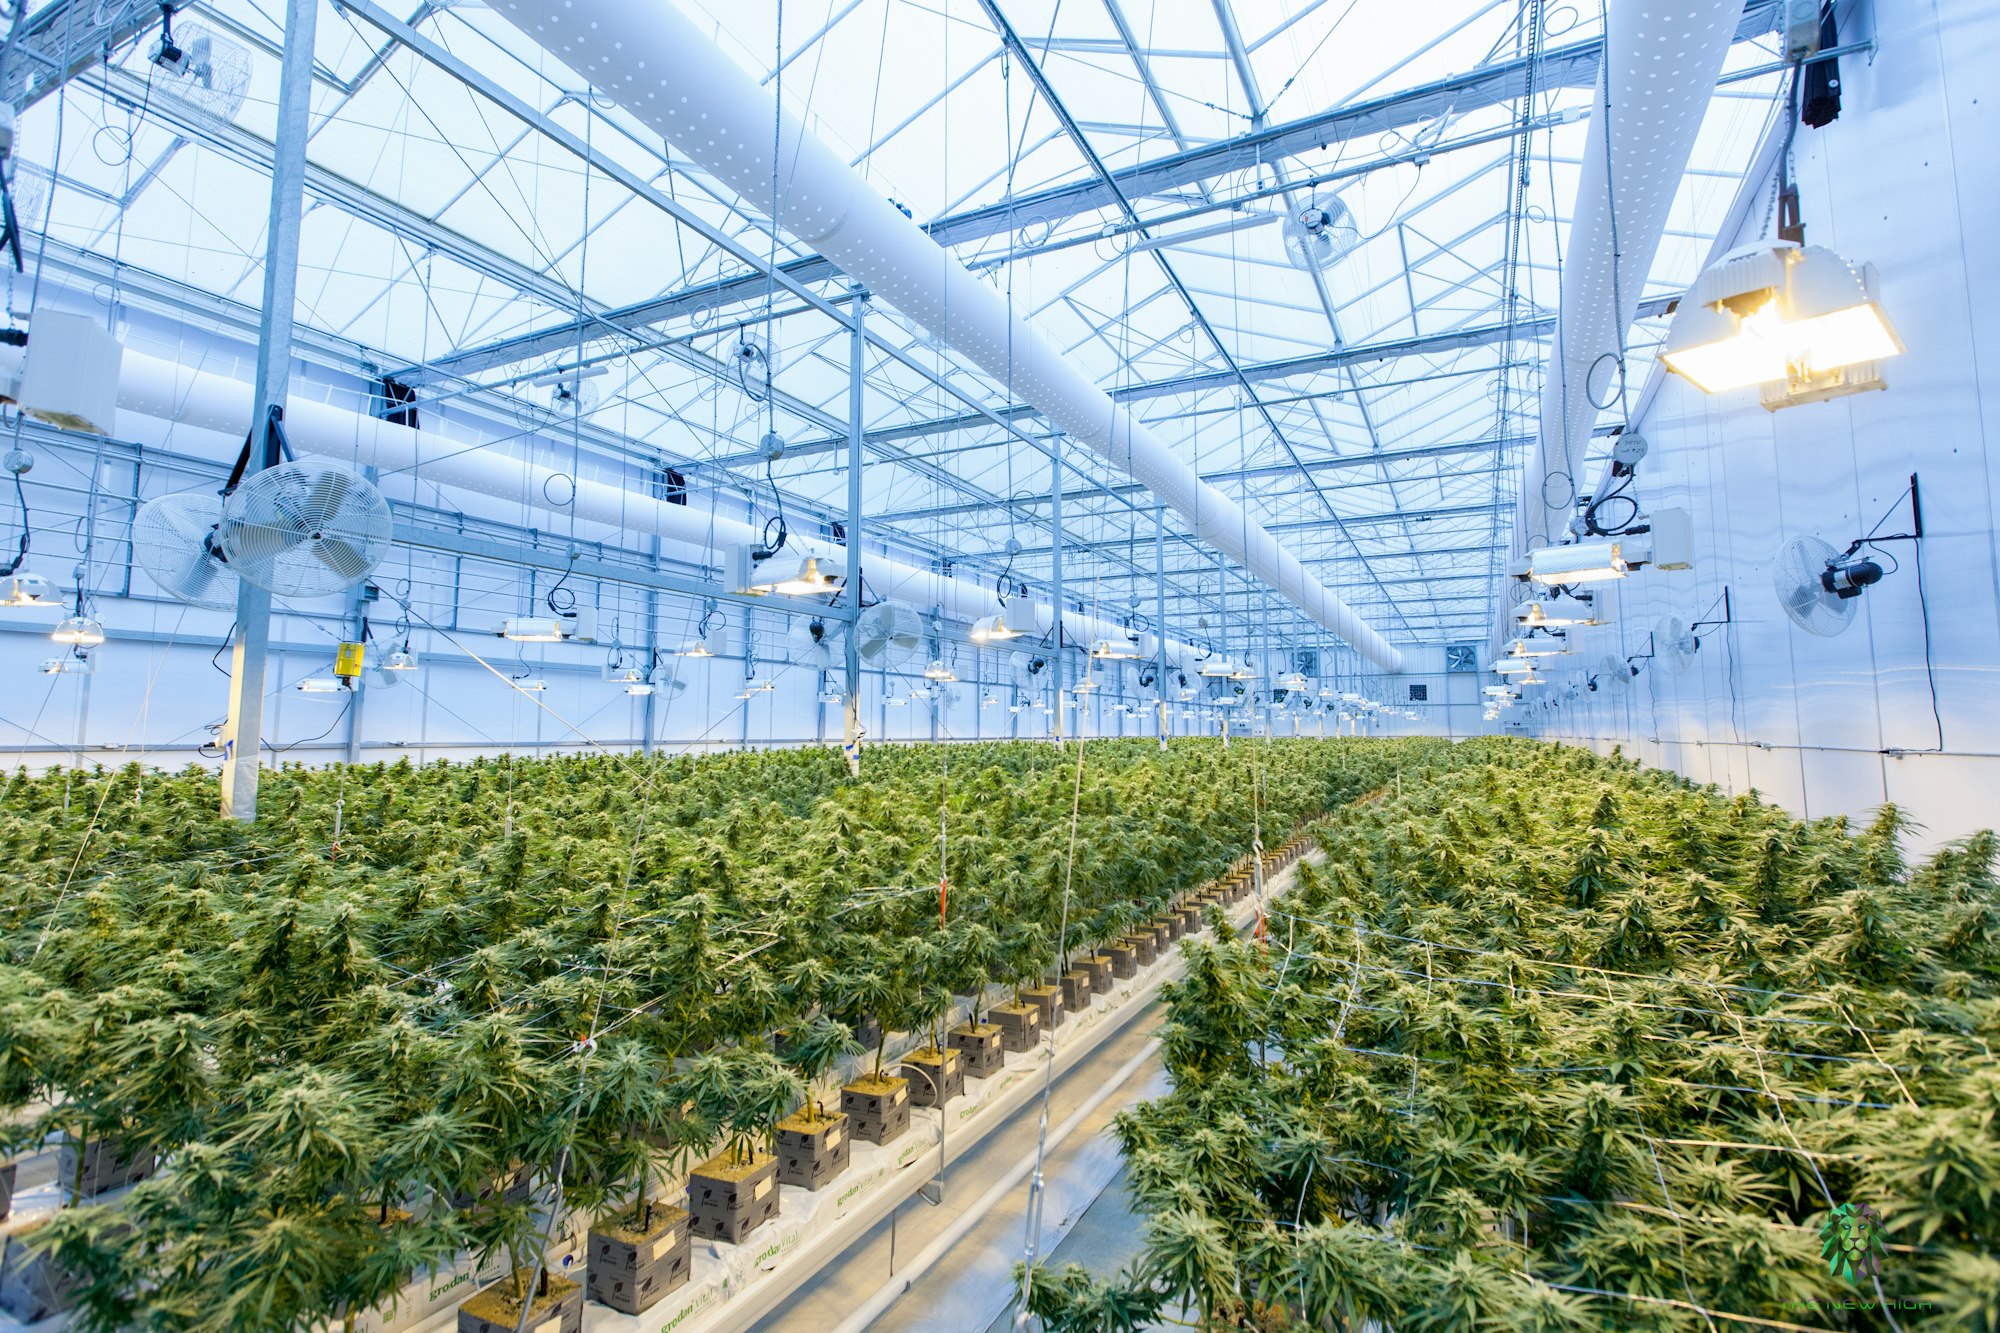 Global enterprise Bayer partners with Prospera to bring greenhouse growers into the age of AI